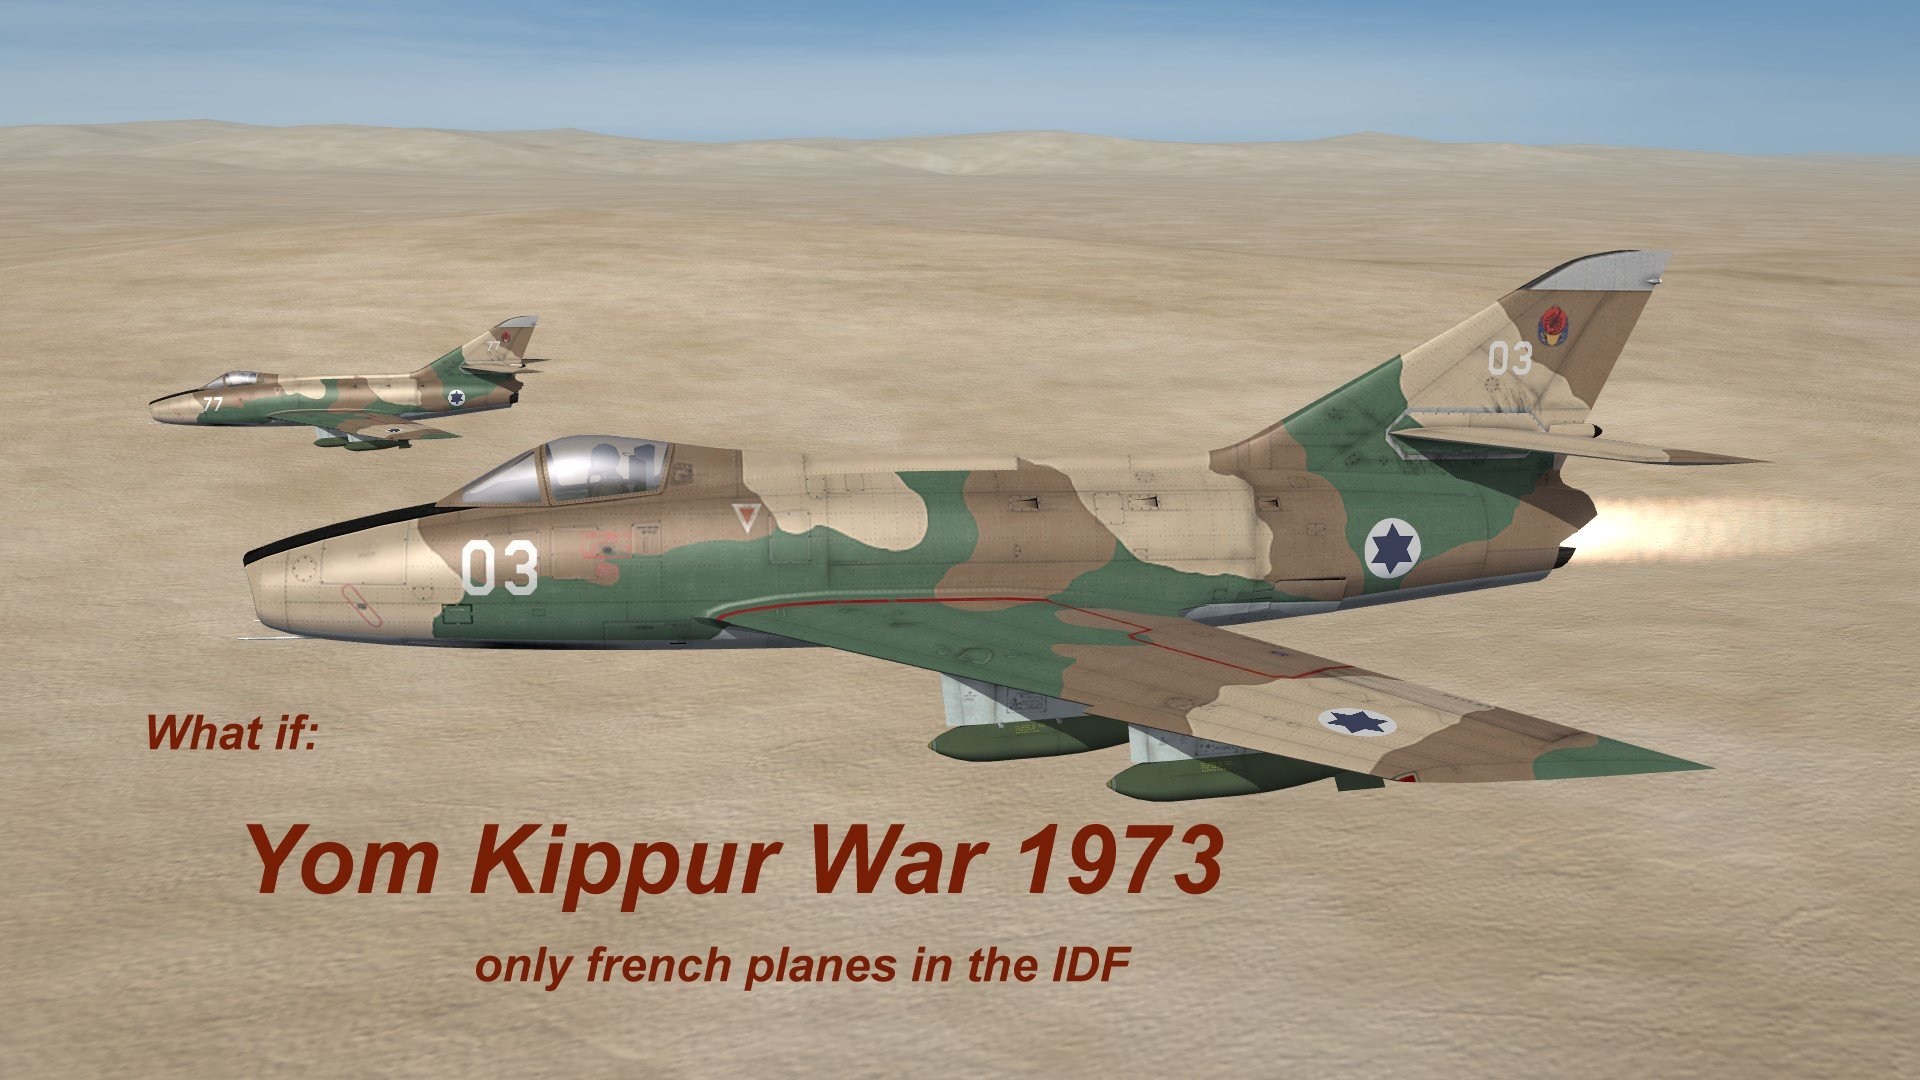 Yom Kippur War only french planes in IDF